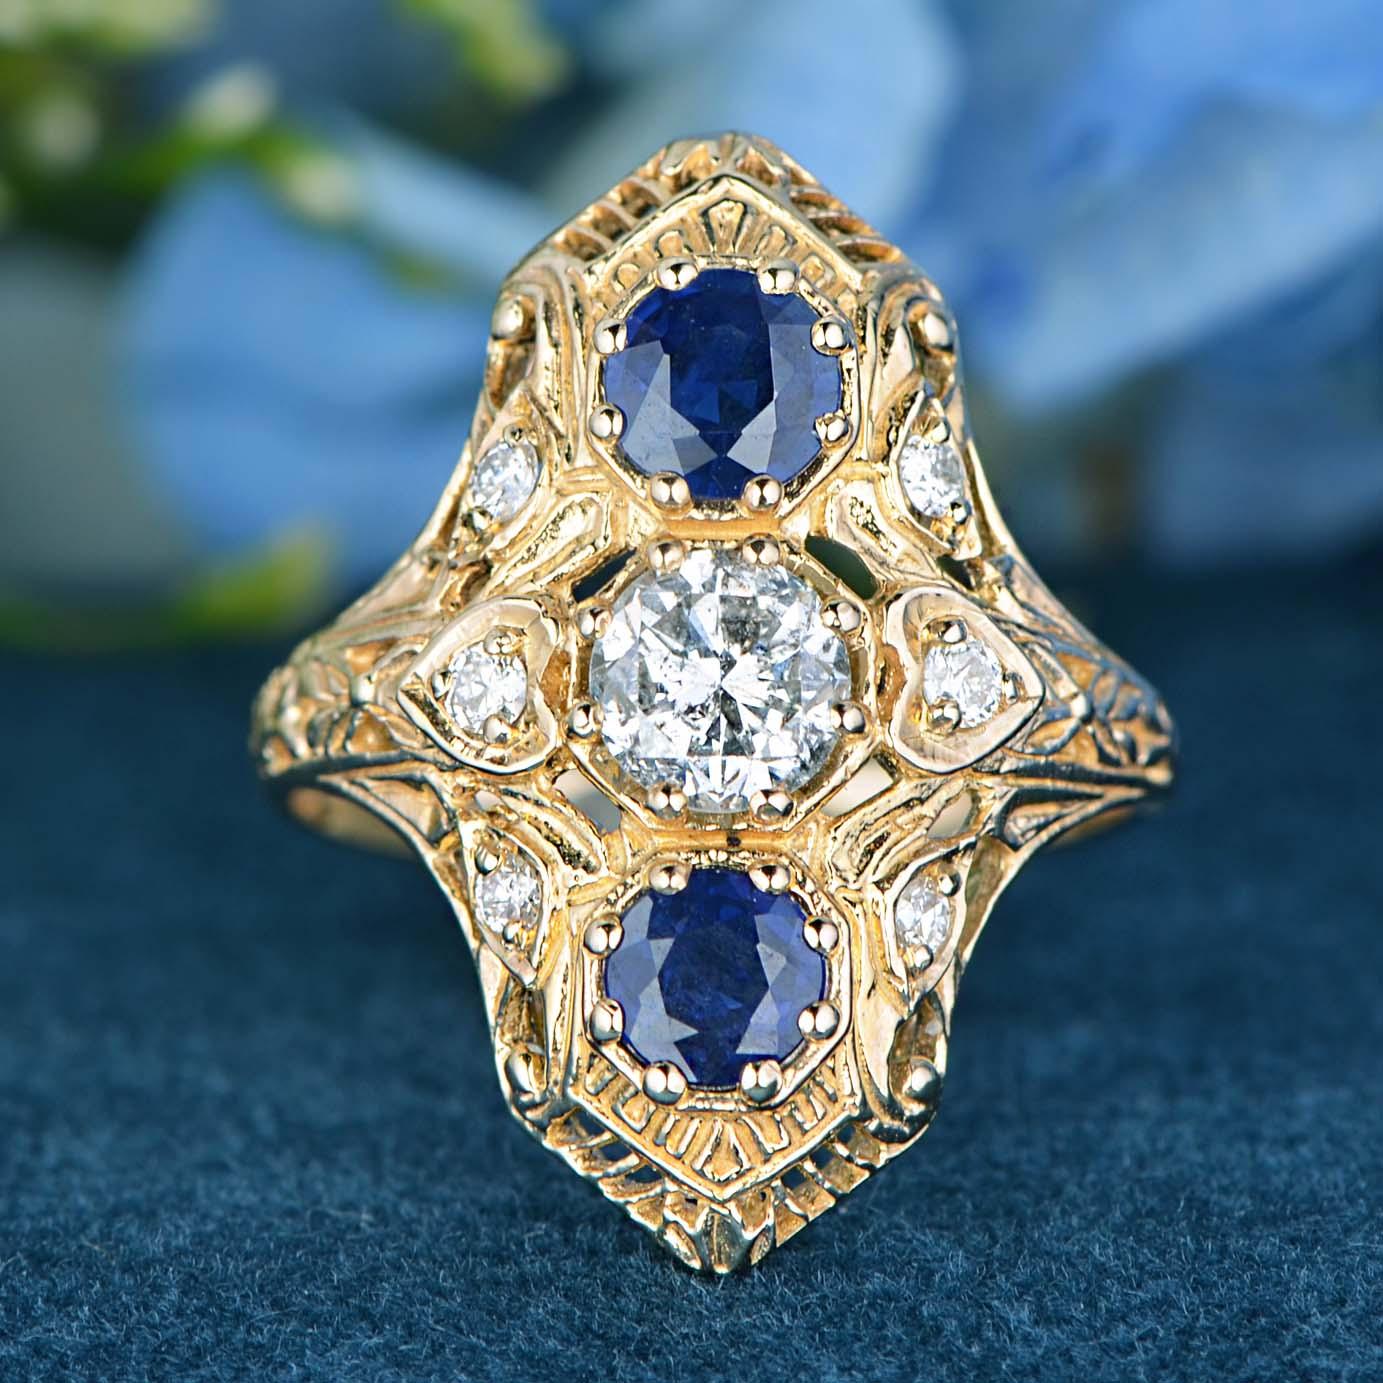 For Sale:  Diamond and Blue Sapphire Antique Style Filigree Three Stone Ring in 9K Gold 3